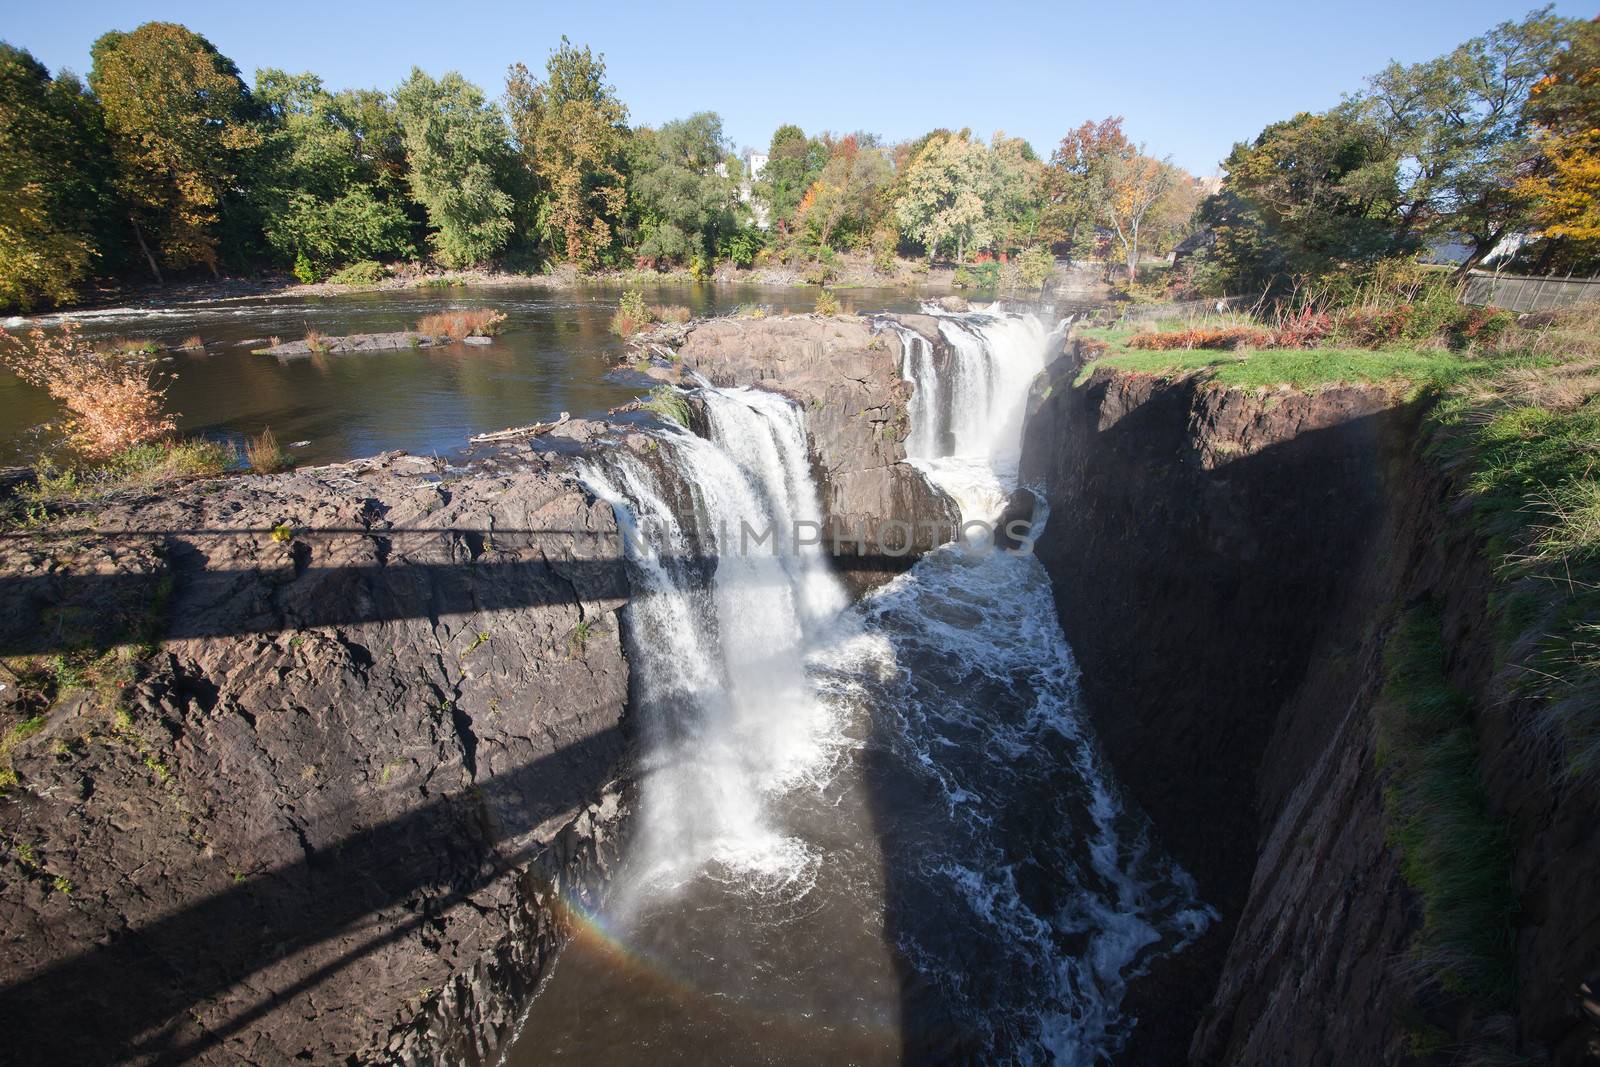 The Great Falls in Paterson, New Jersey